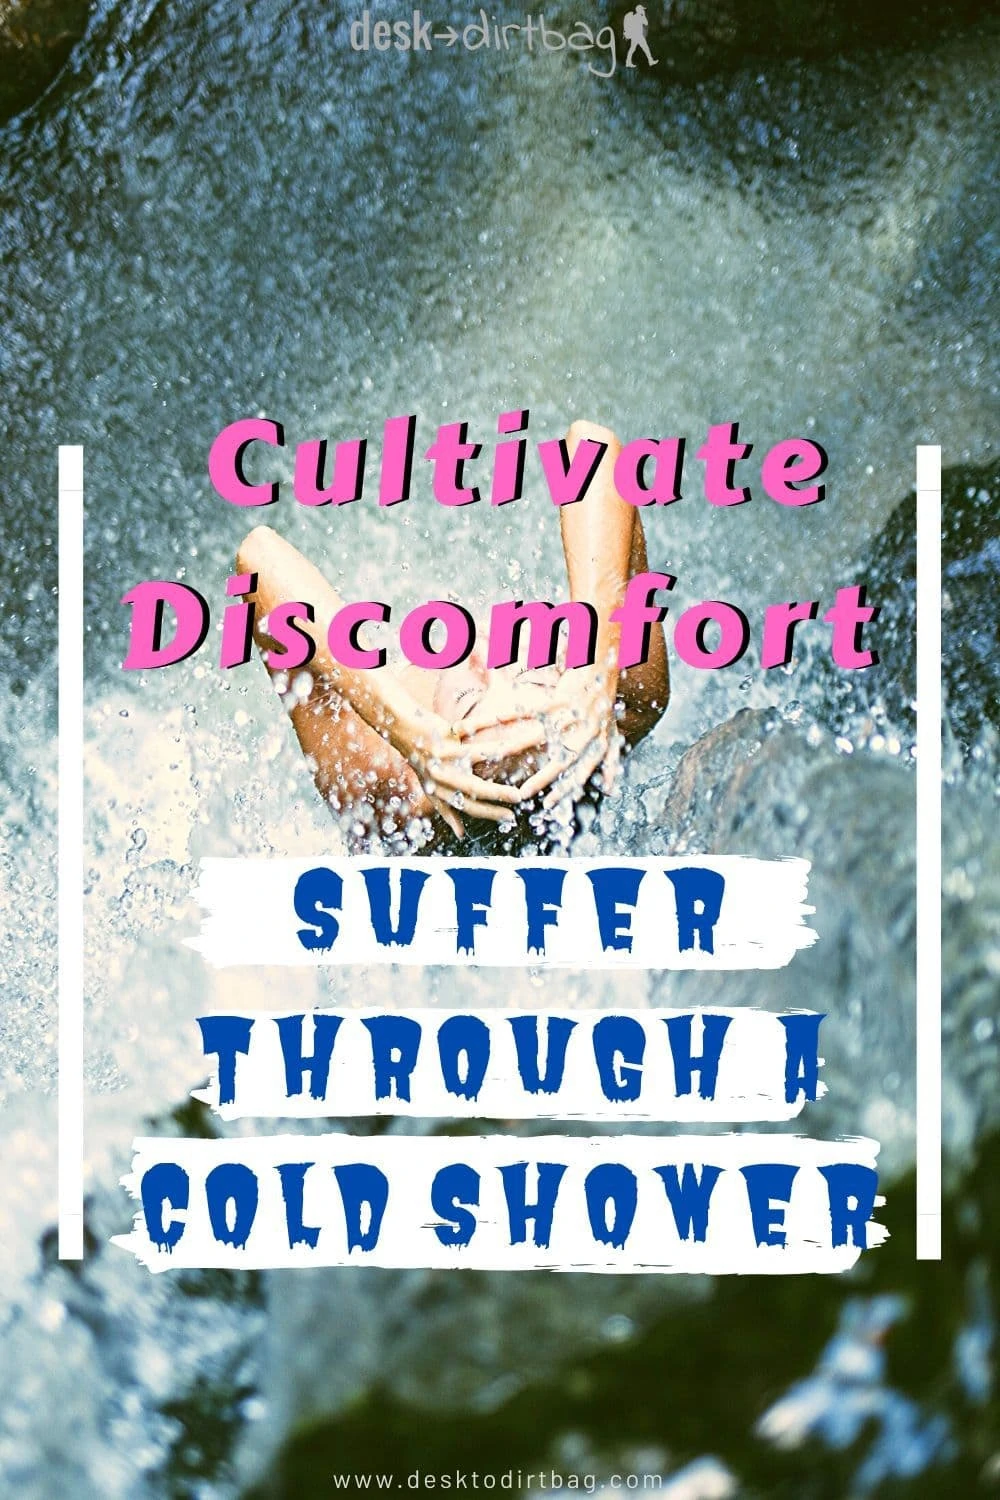 Cold Showers and the Art of Cultivating Discomfort